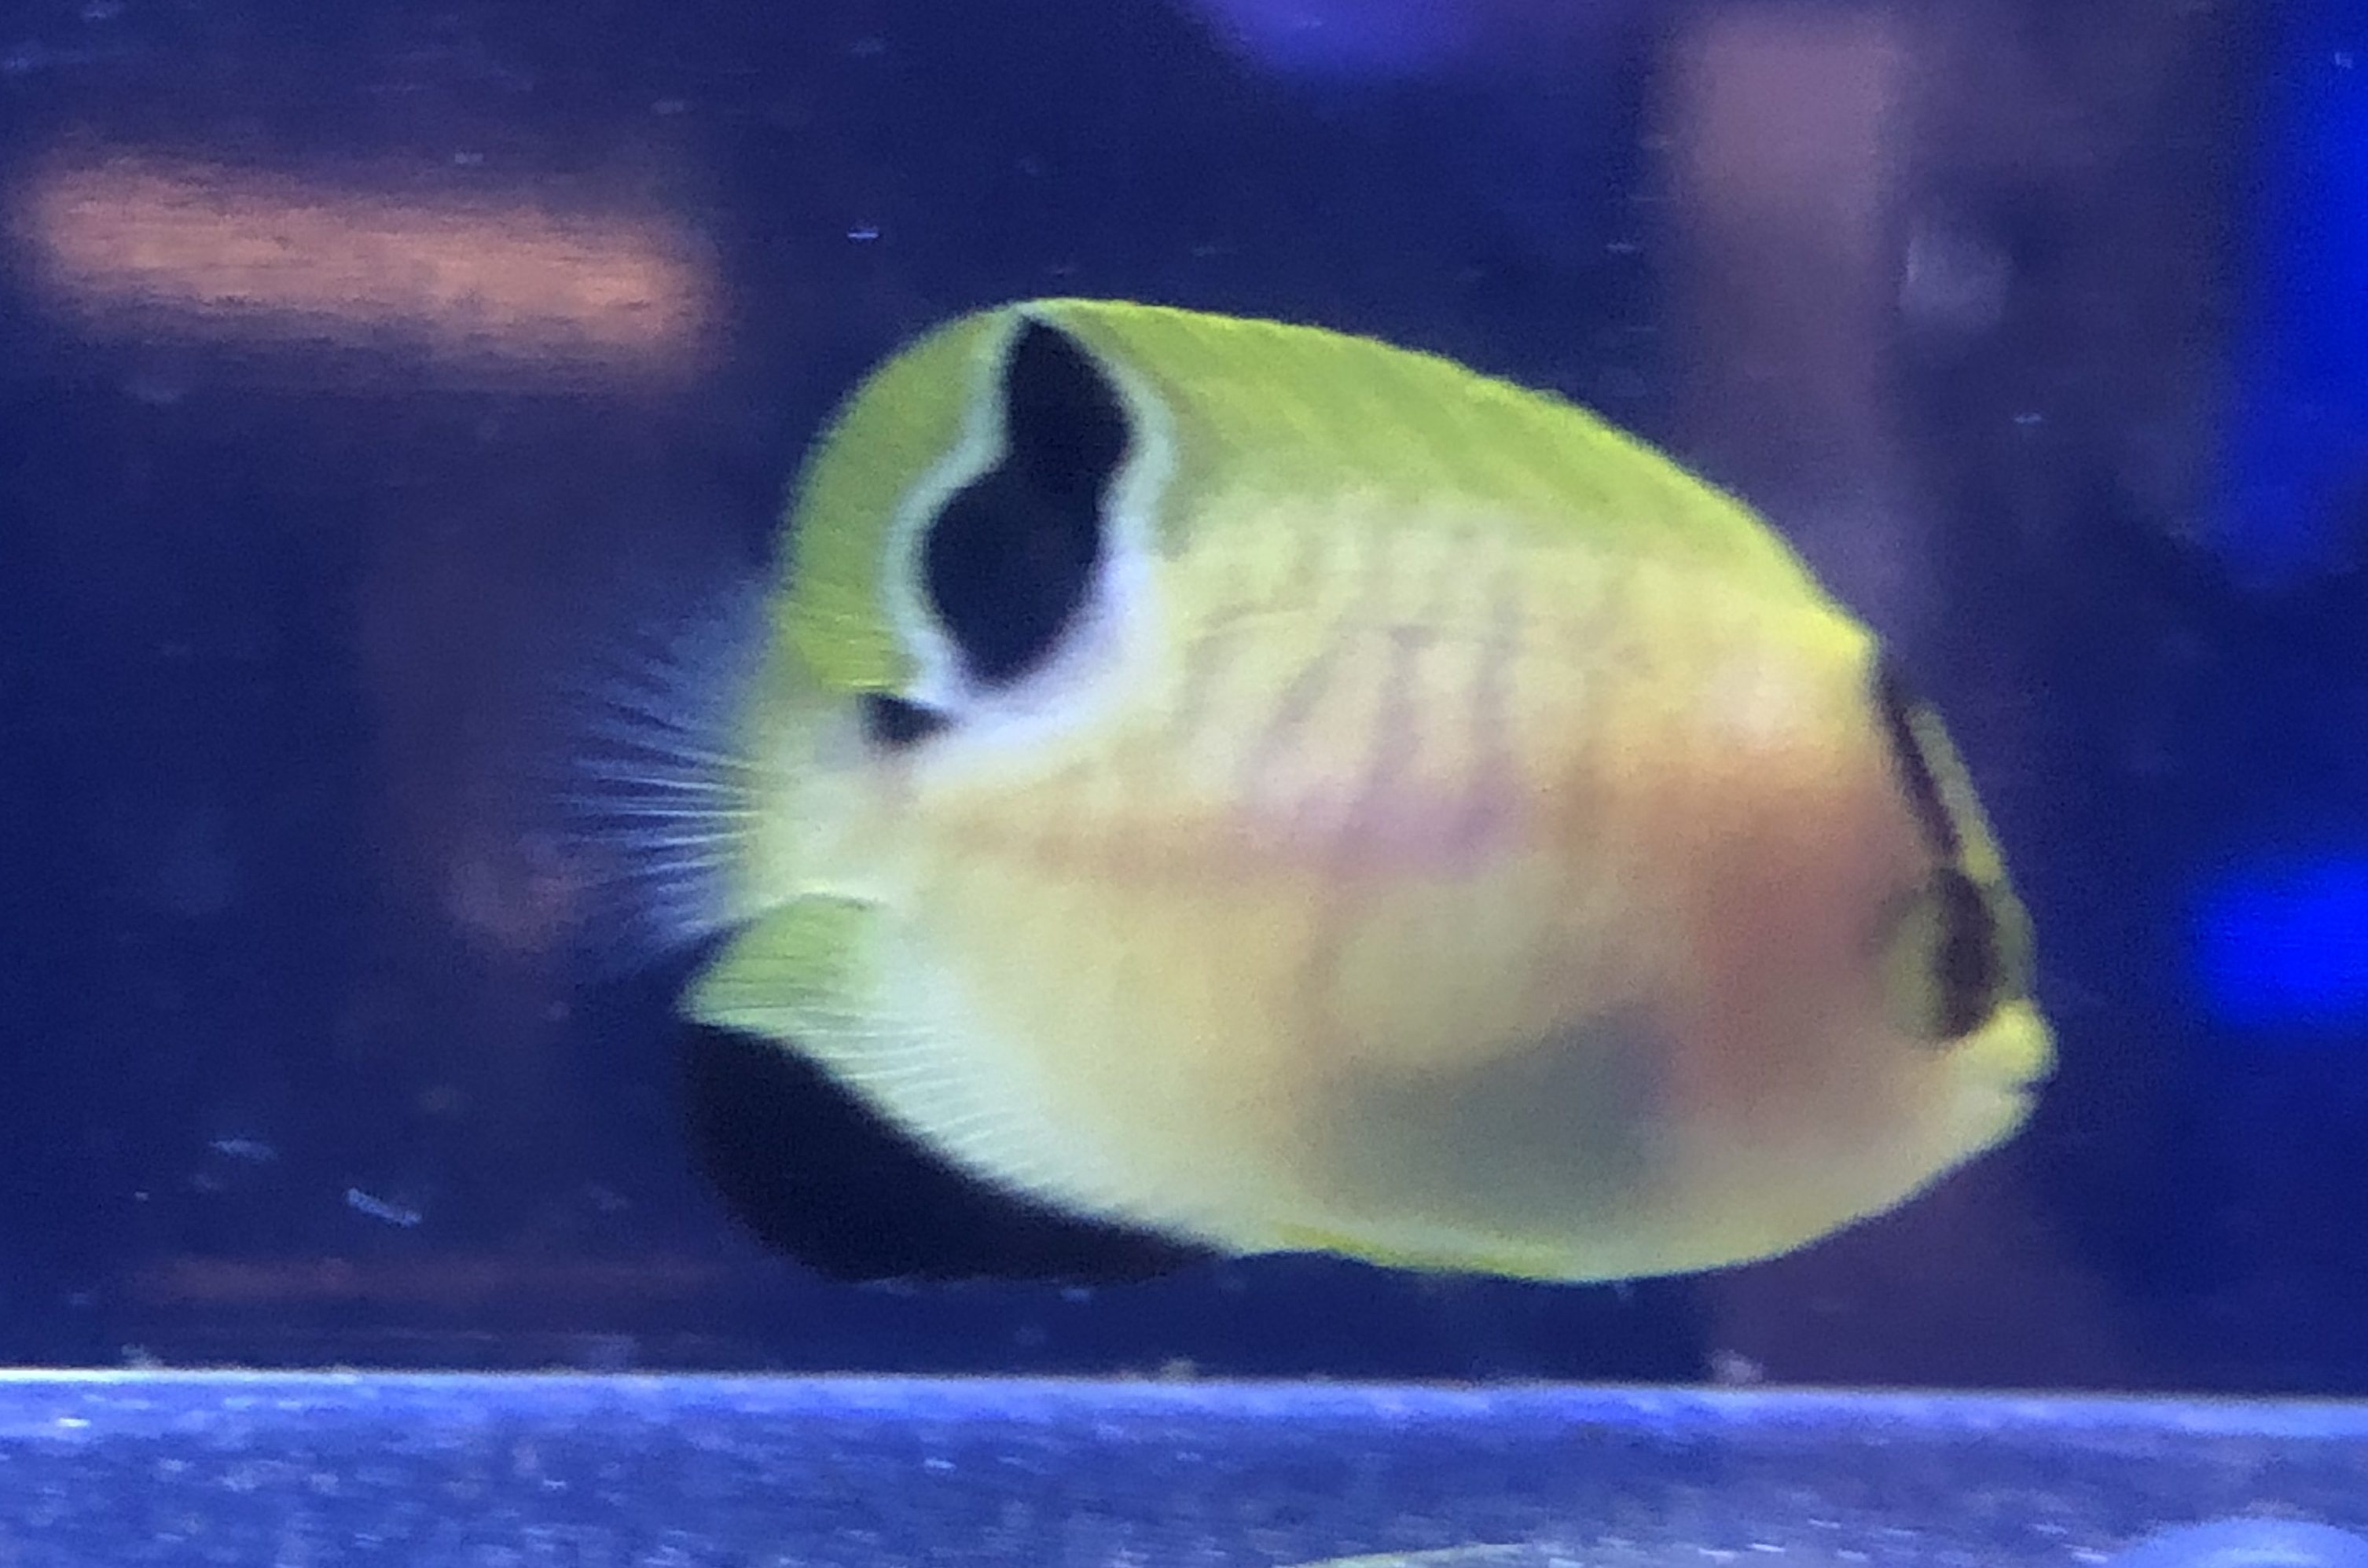 Aquaculture Obsessed- Bringing the Aquacultured Goldflake Angel to our LFS